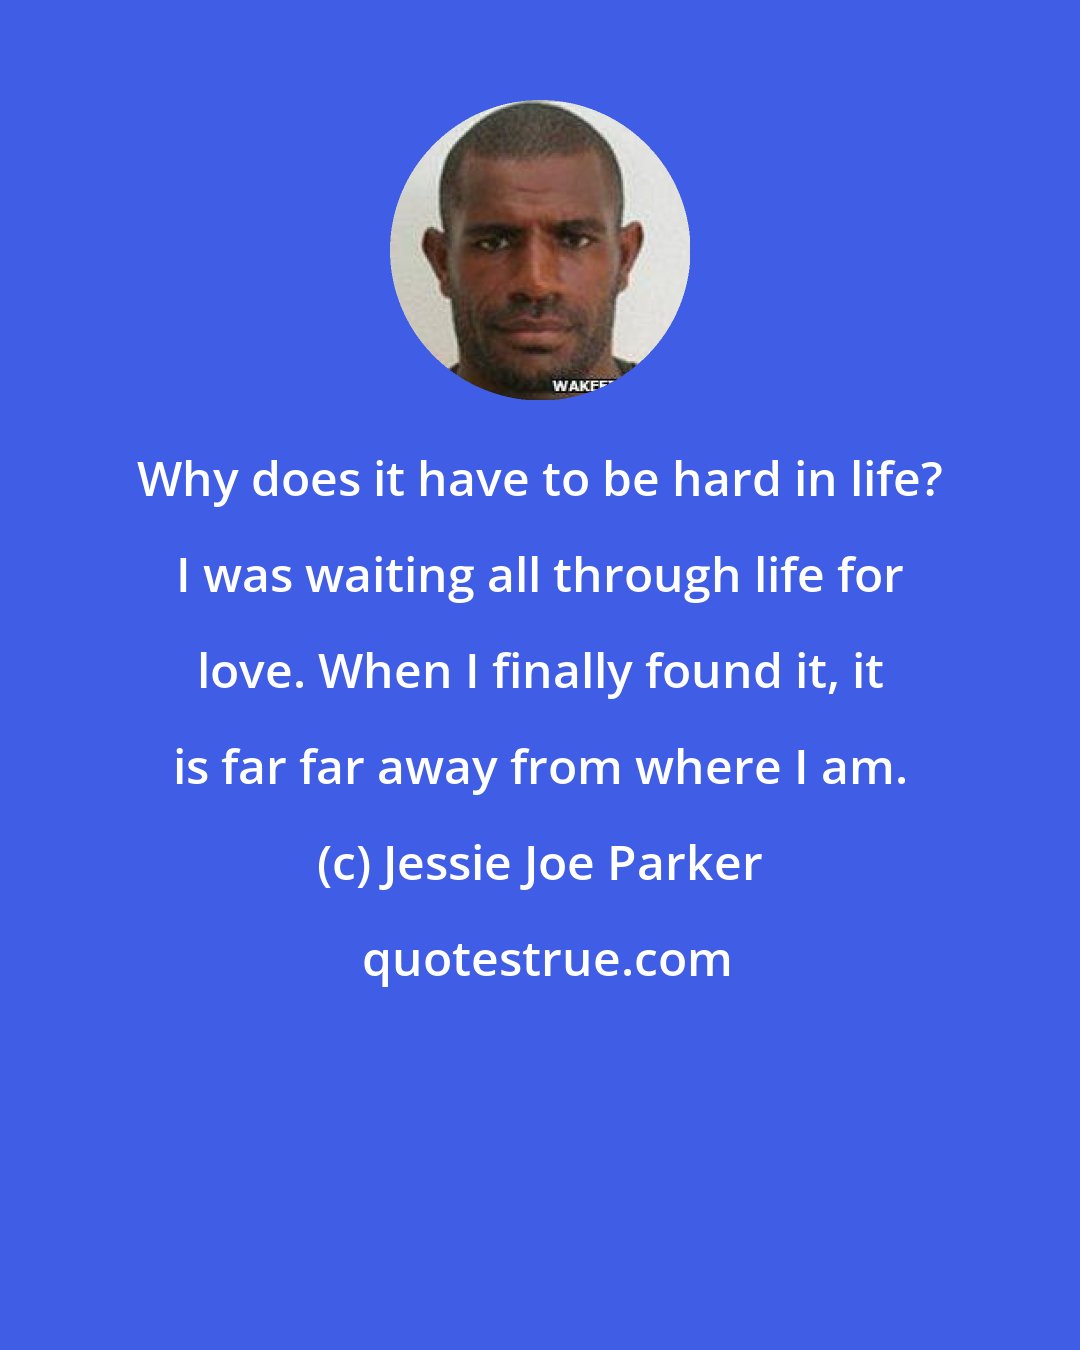 Jessie Joe Parker: Why does it have to be hard in life? I was waiting all through life for love. When I finally found it, it is far far away from where I am.